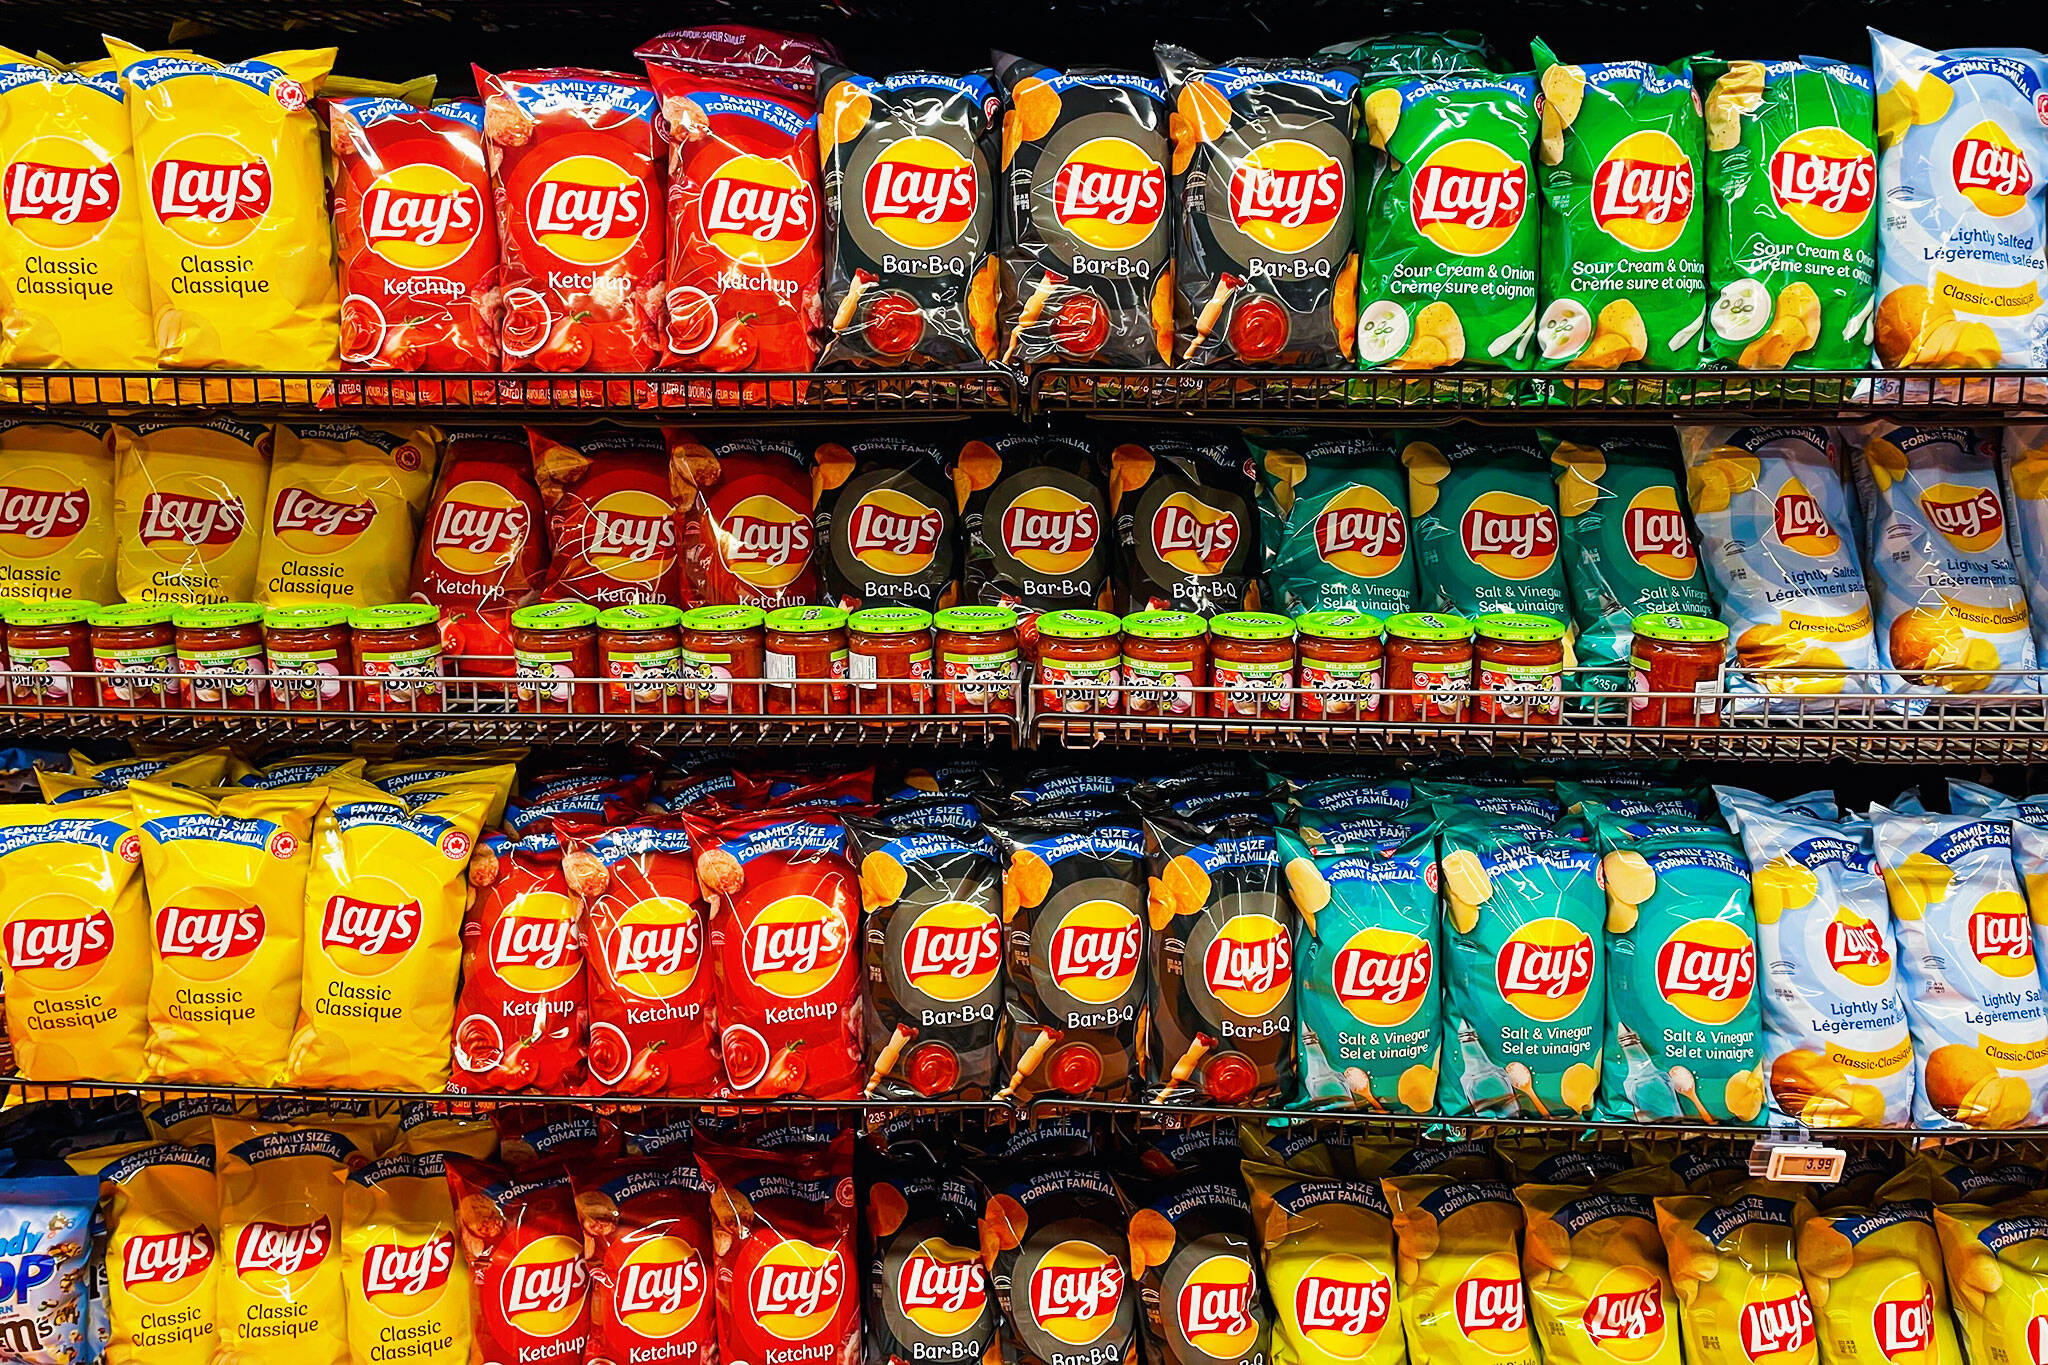 SNACK ATTACK: Toronto shoppers complain about price of chips